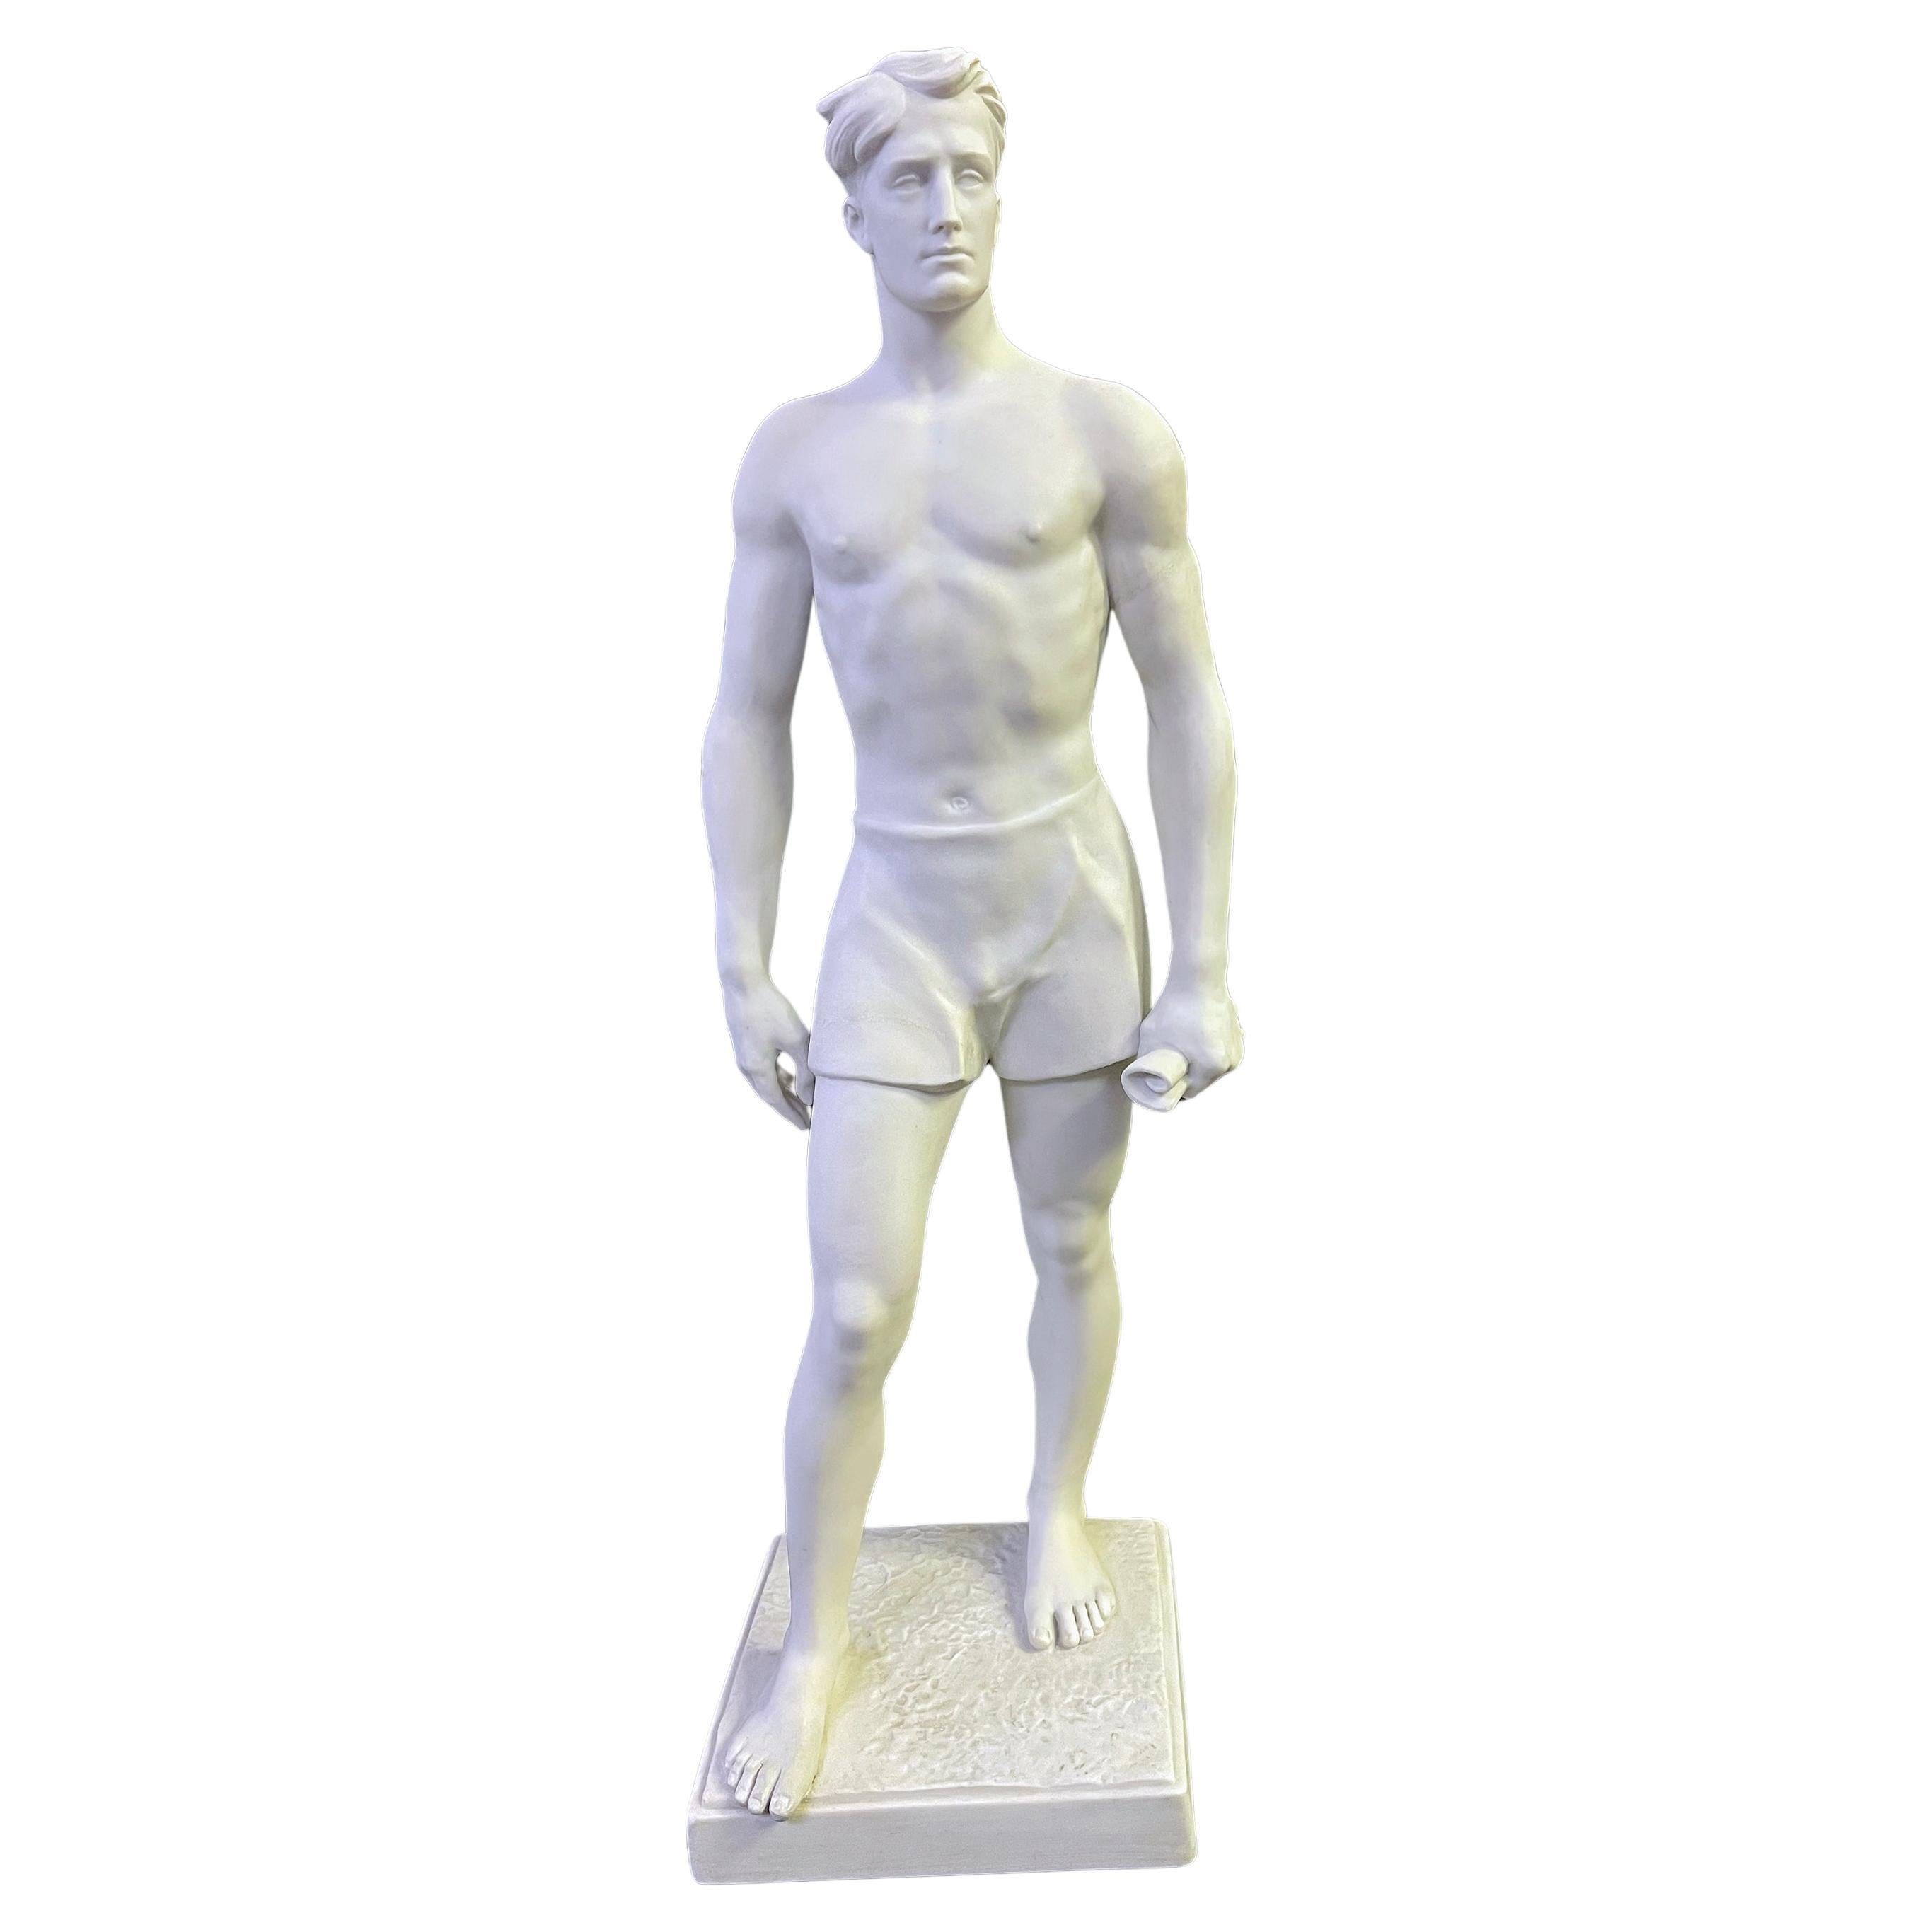 "The Victor", Idealized Male Figure in Porcelain by Franz Nagy, 1930s